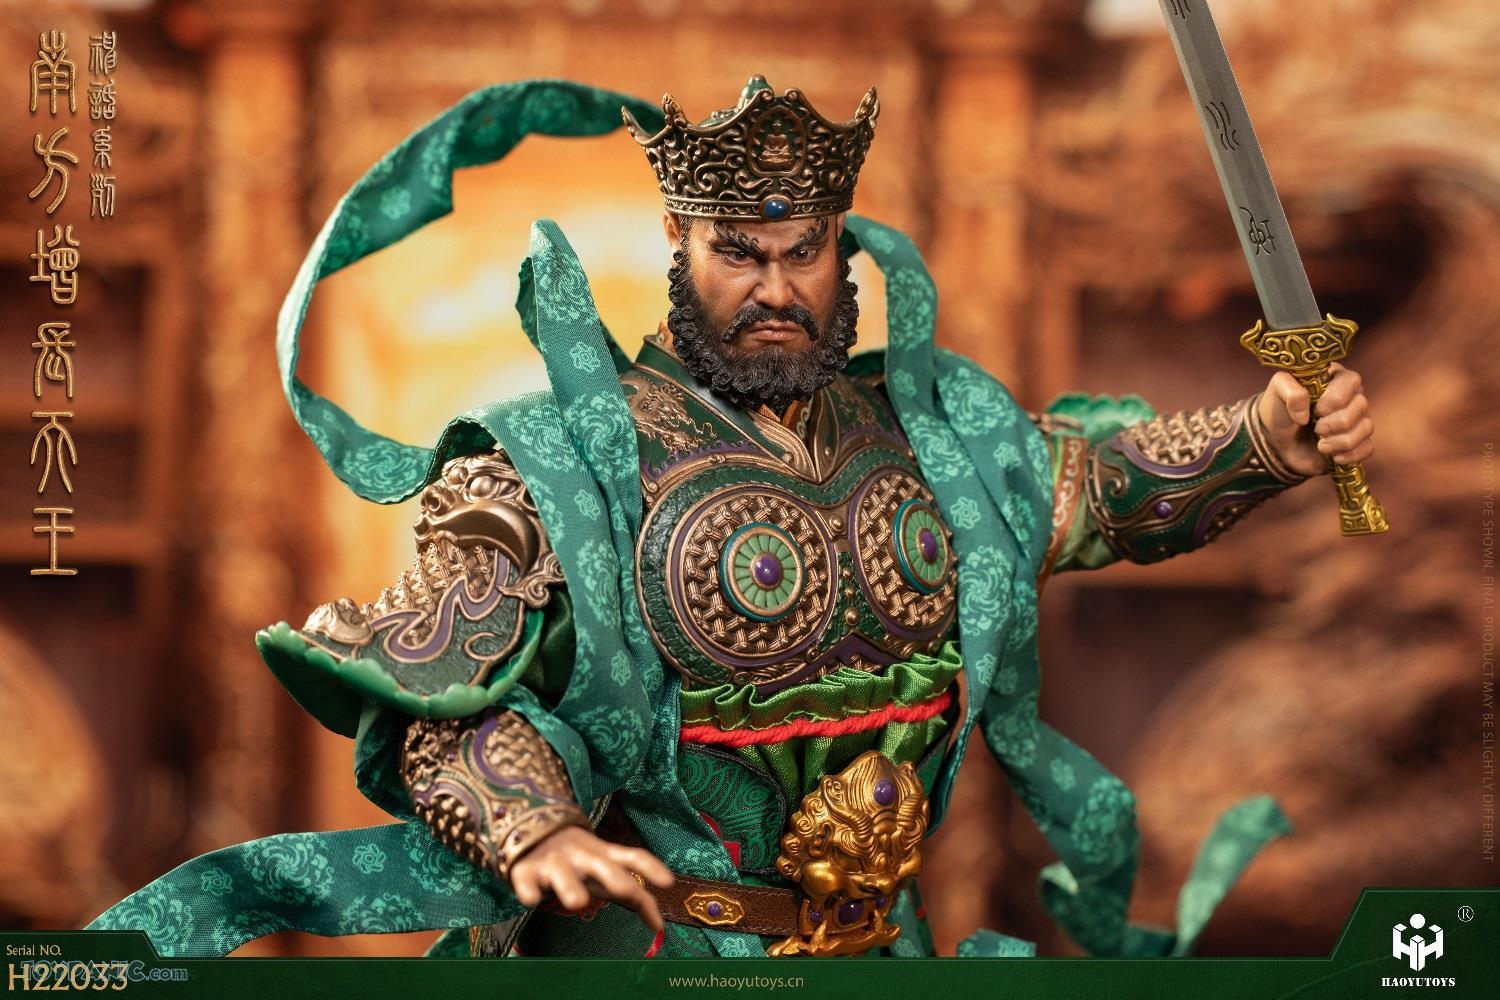 mythseries - NEW PRODUCT: HaoYuToys 1/6 Myth Series Southern Growth King 212202451839PM_2531640